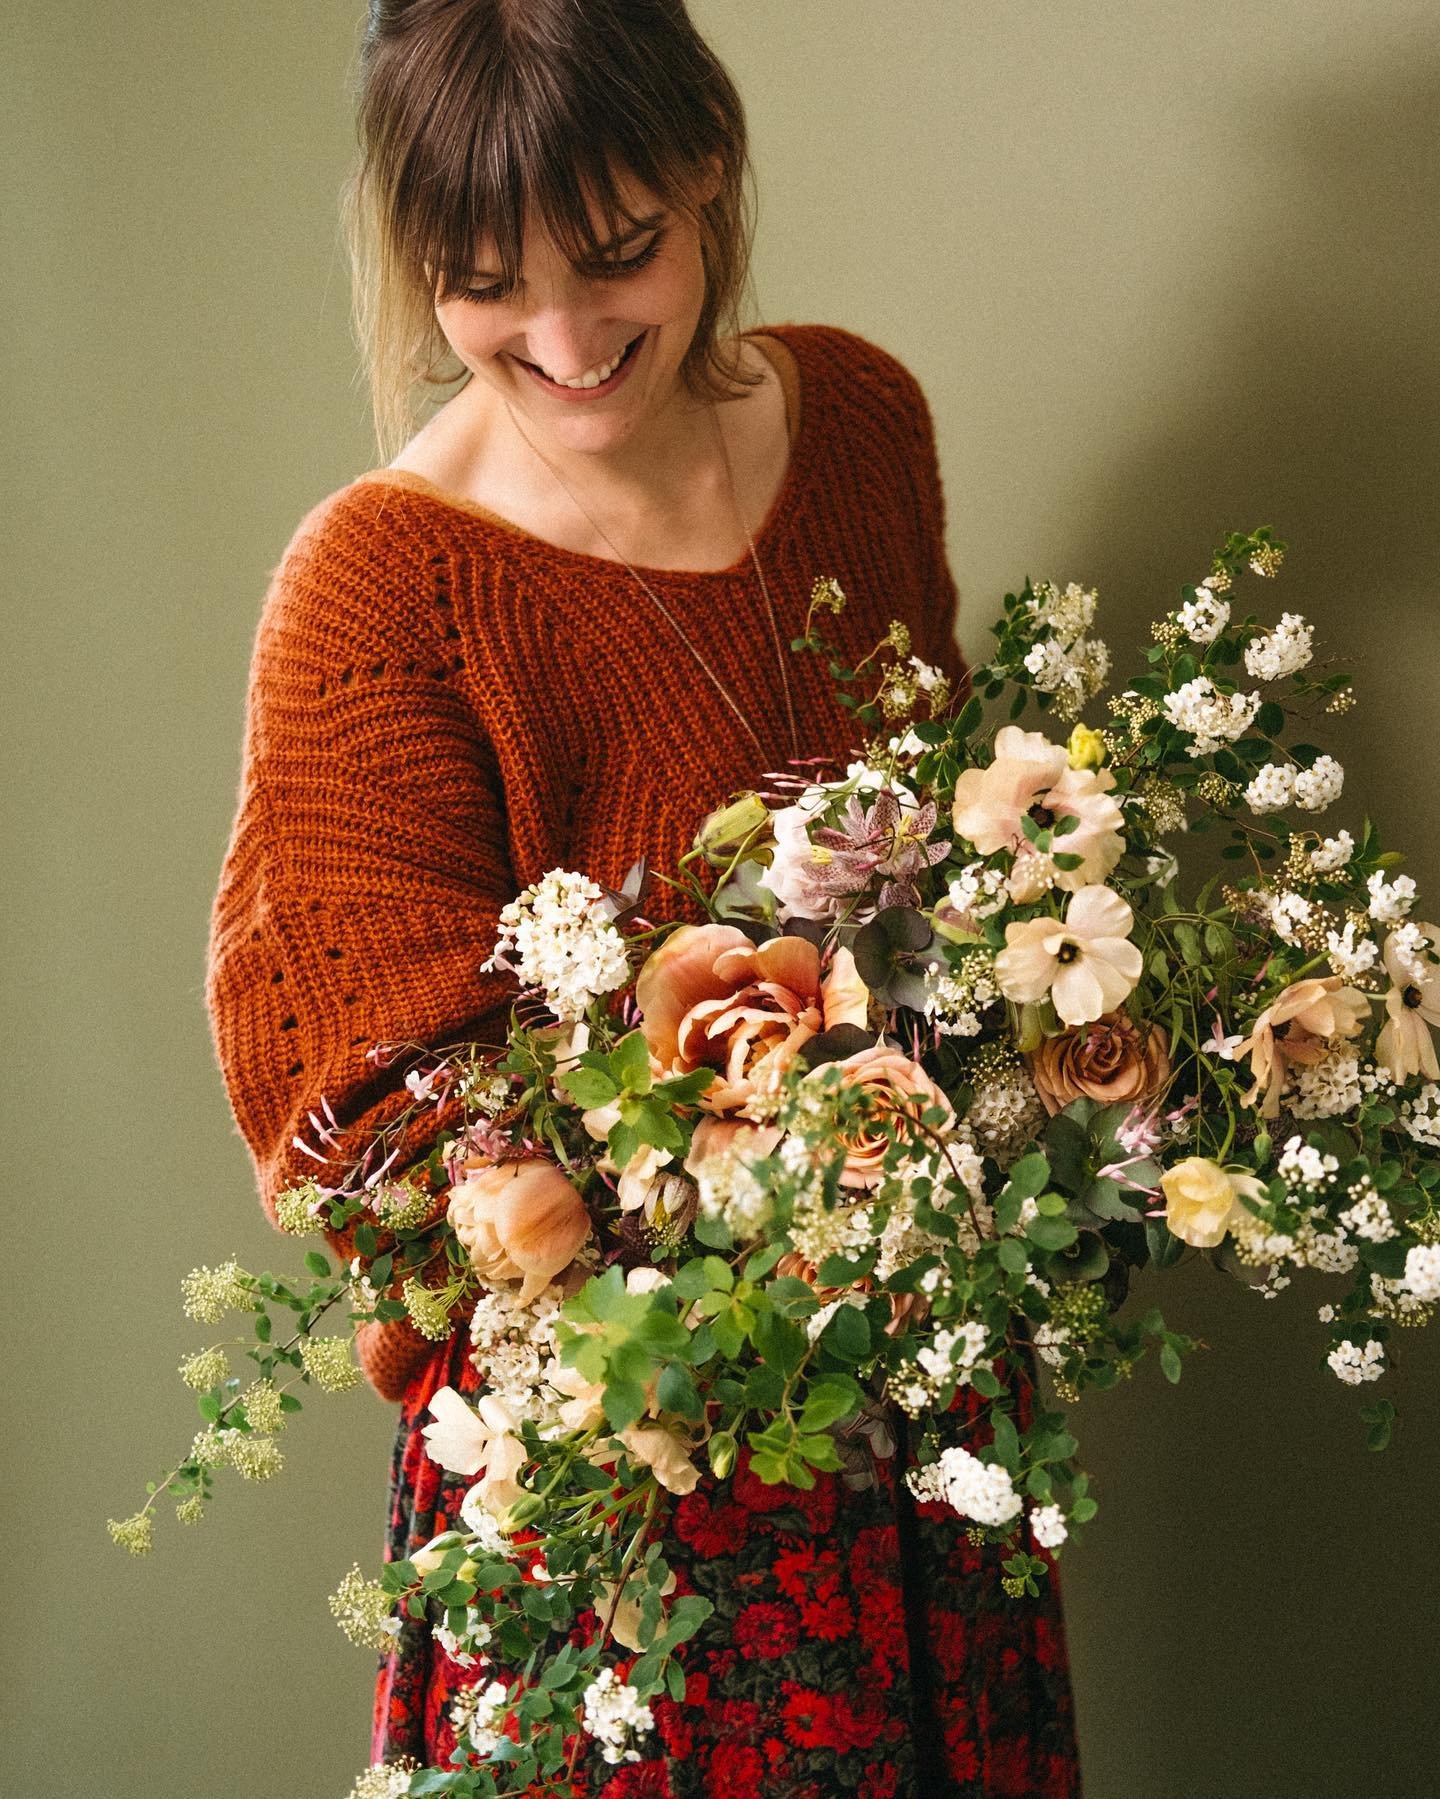 For all the new faces around here.. hi! This is me, Anne 👋🏻

I&rsquo;m a floral artist and educator based in the Netherlands. And I&rsquo;m the very real person behind this account. I don&rsquo;t use AI, chatbots or any other gadgets/people, it&rsq